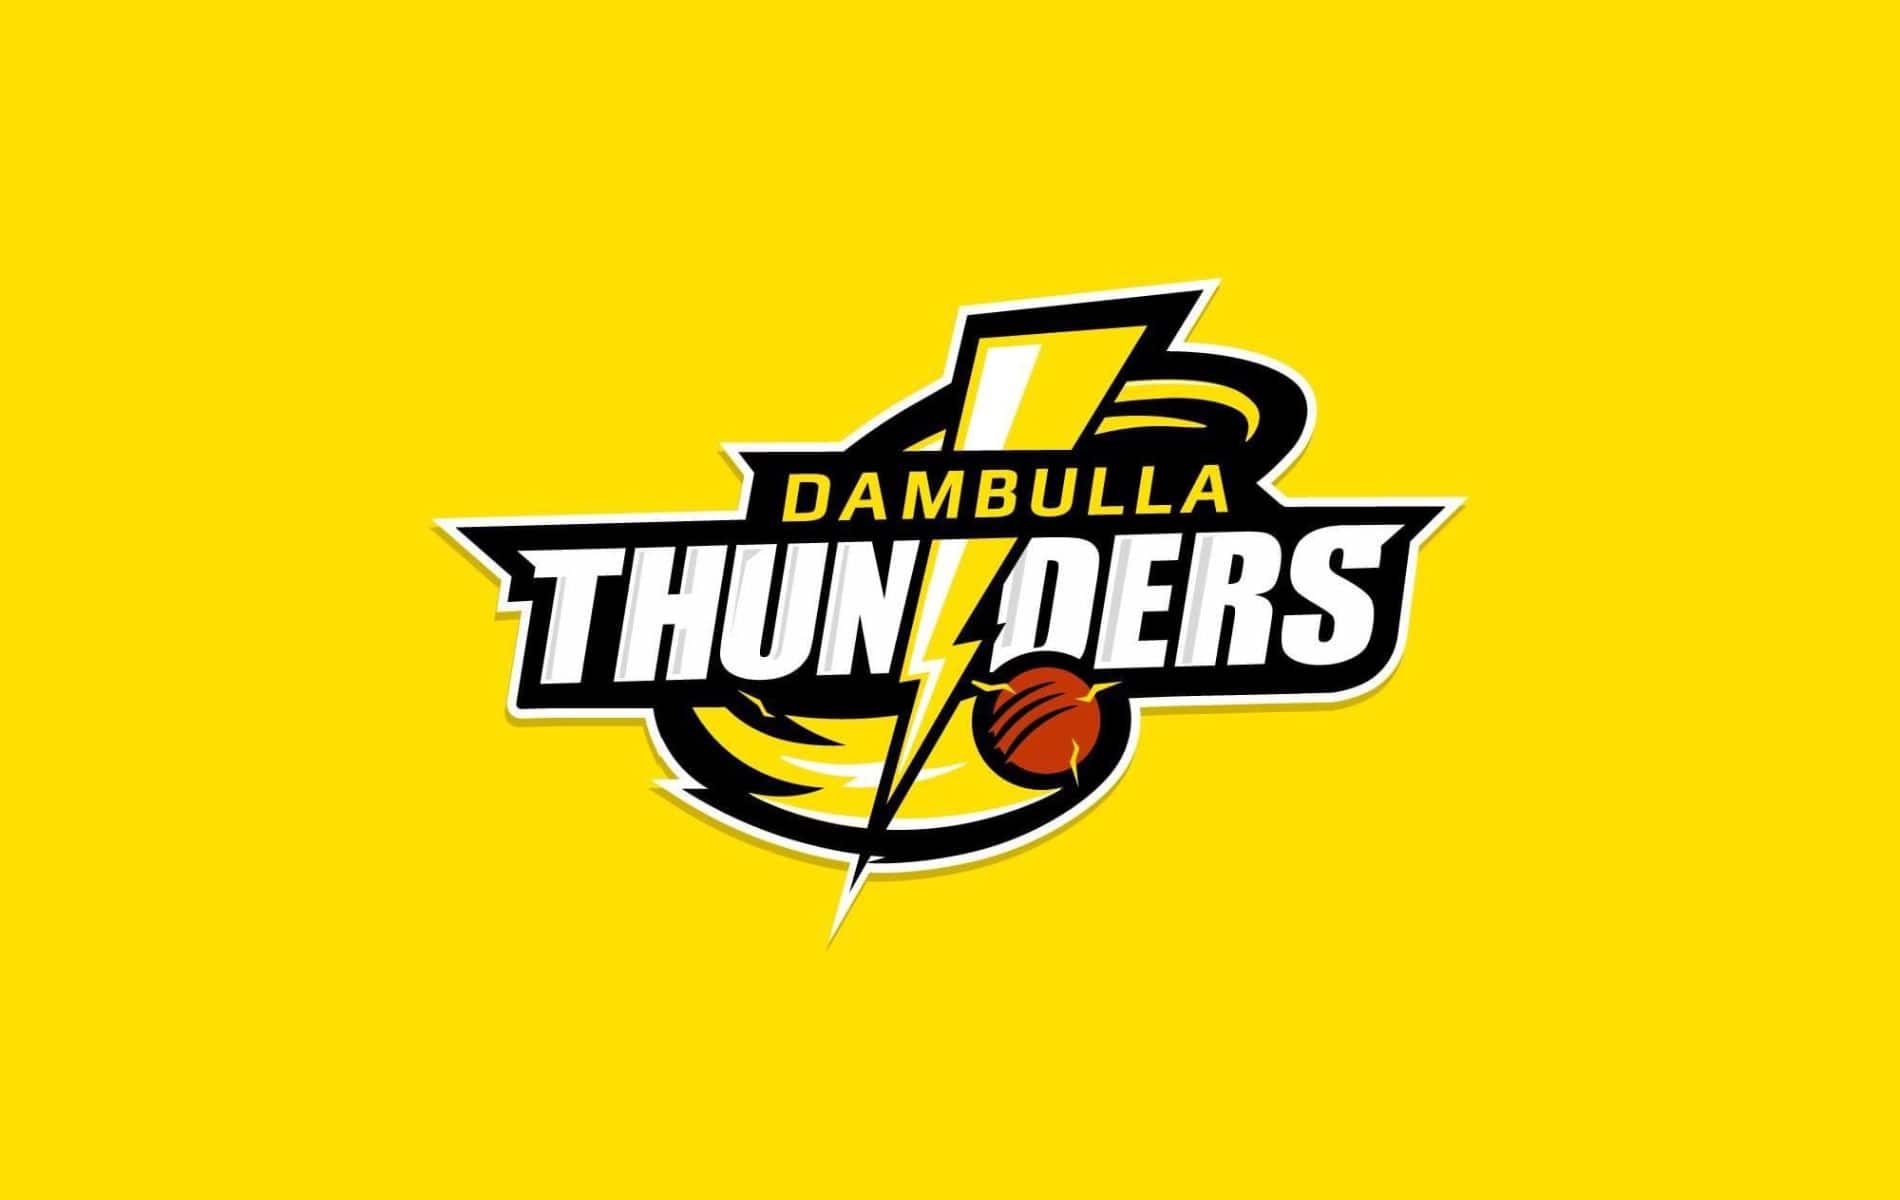 Dambulla Thunders got terminated a day after auctions (X)